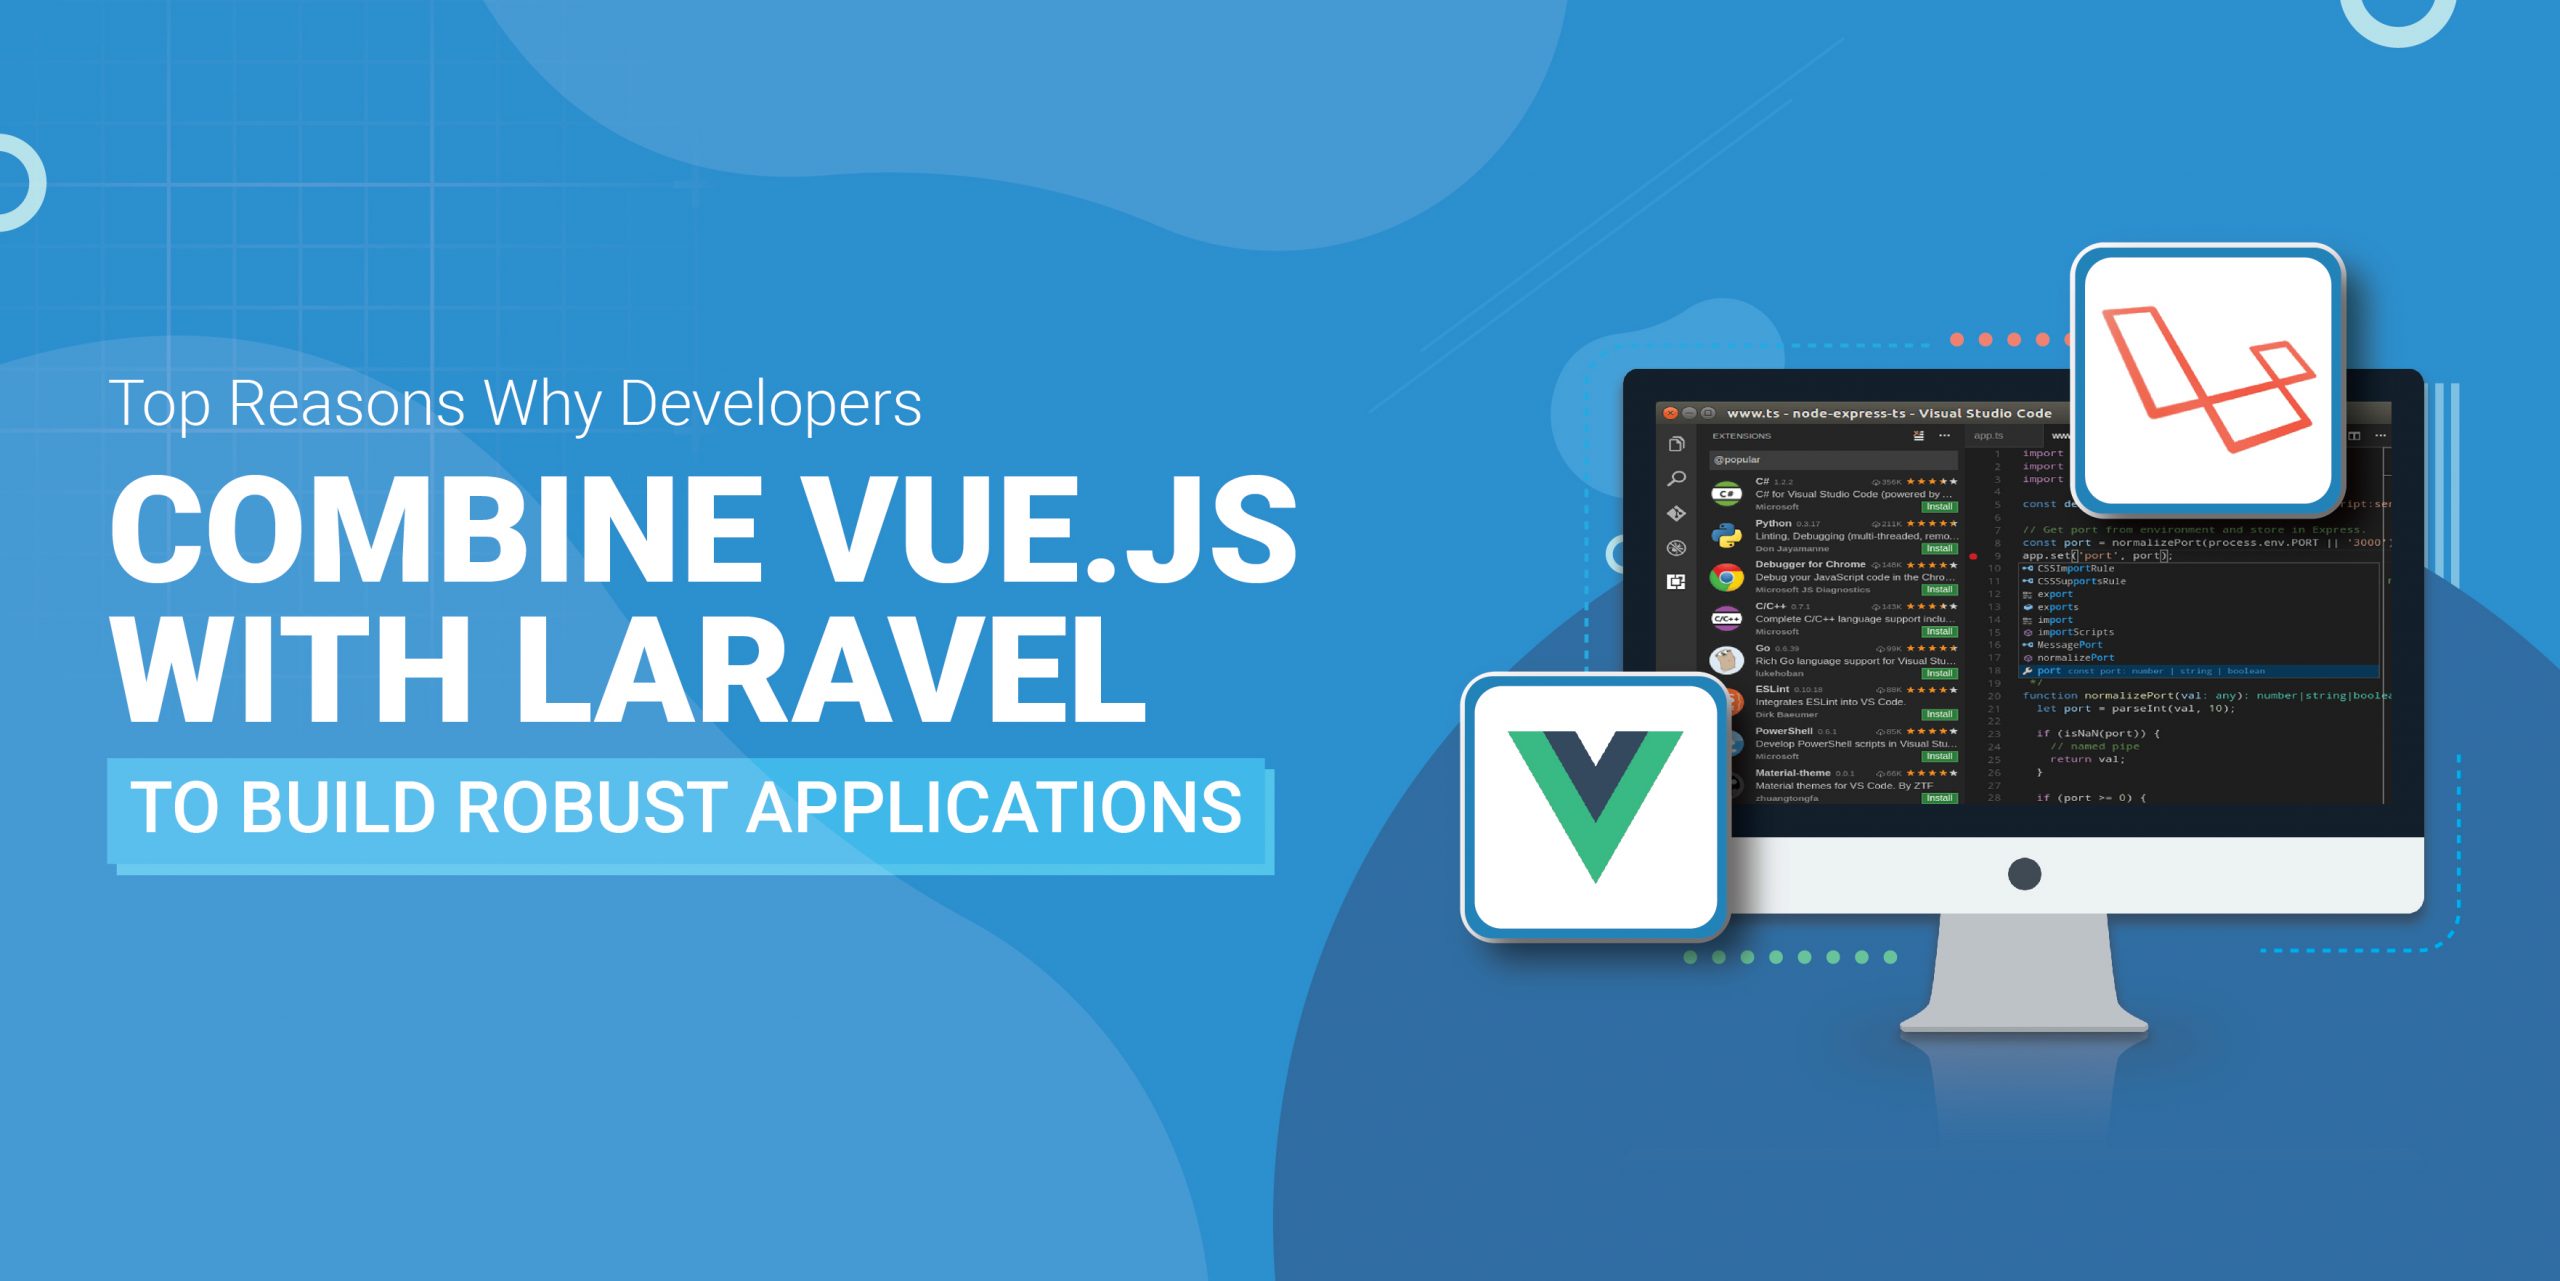 Top Reasons Why Developers Combine Vue.js with Laravel to Build Apps